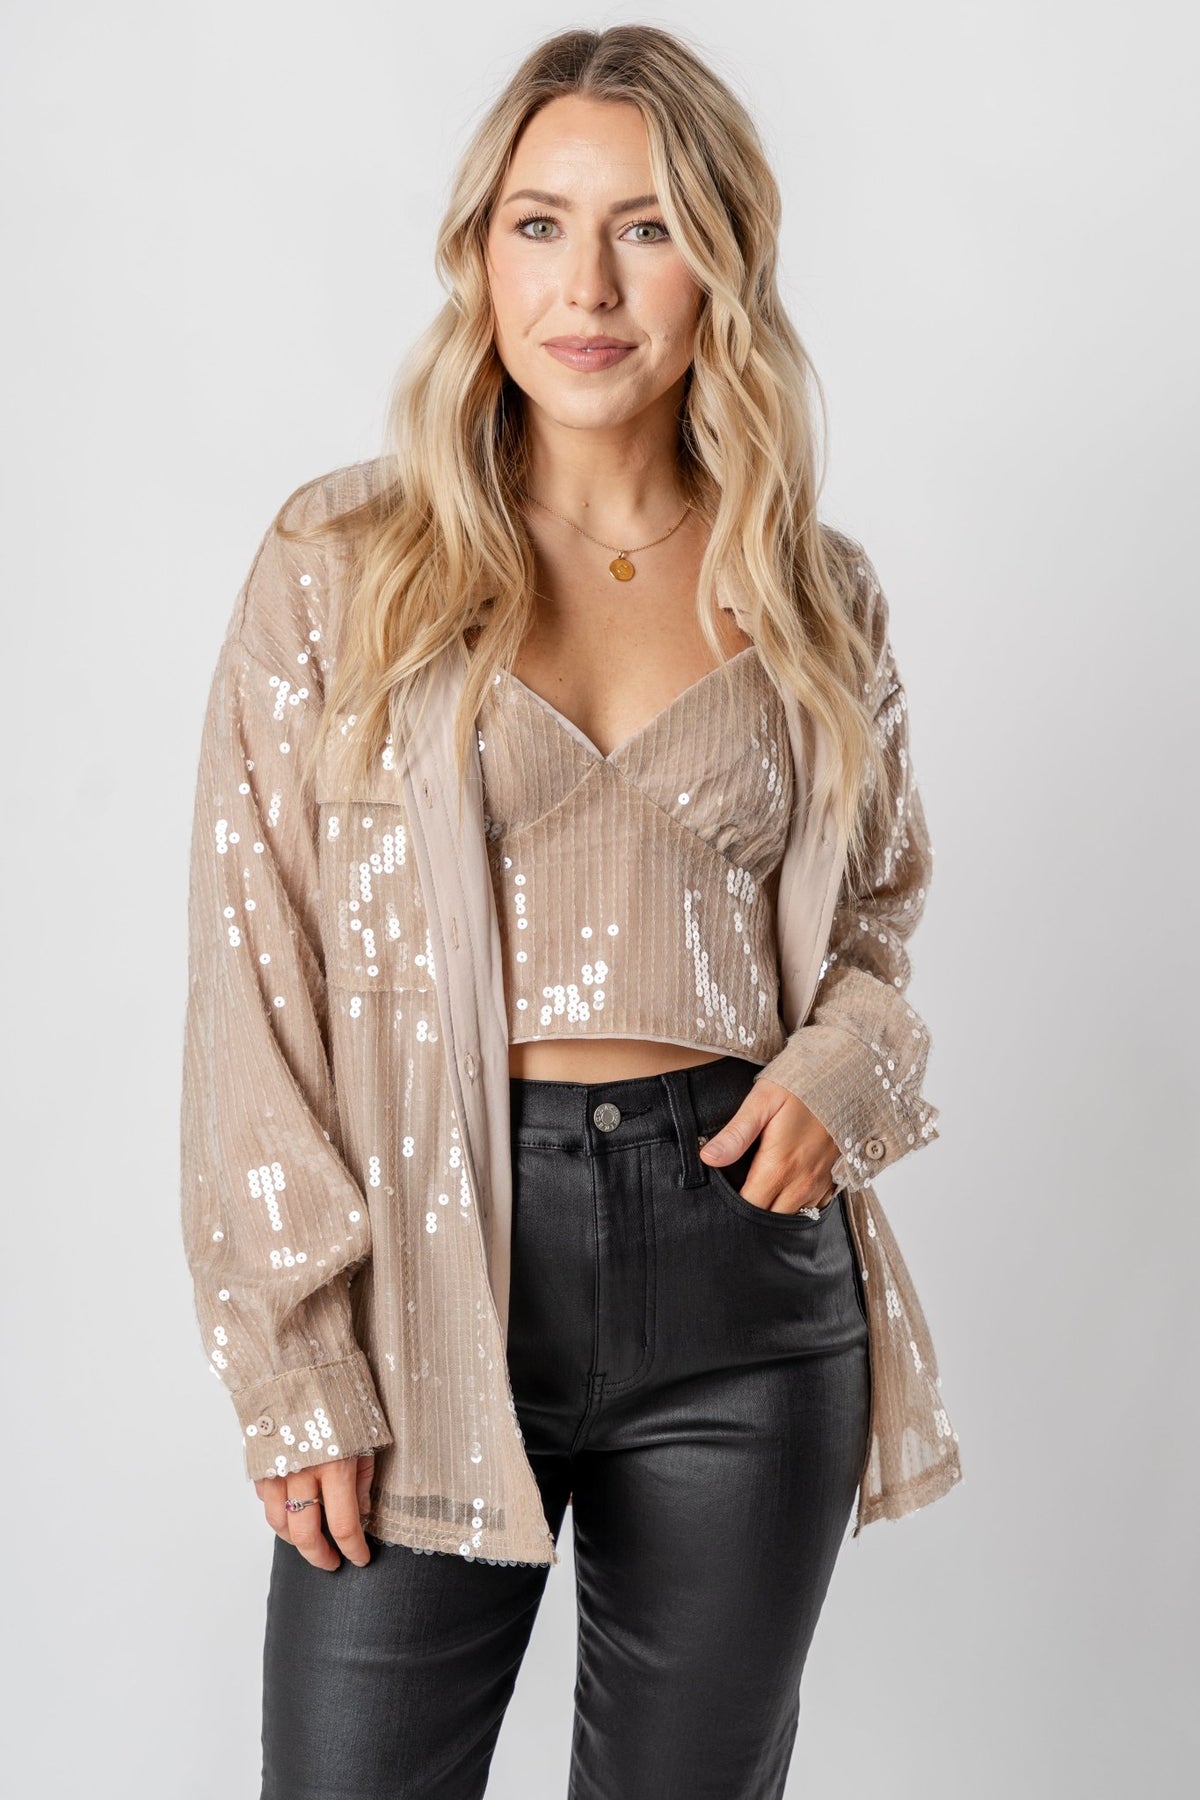 Sequin long sleeve button up top taupe - Trendy New Year's Eve Outfits at Lush Fashion Lounge Boutique in Oklahoma City